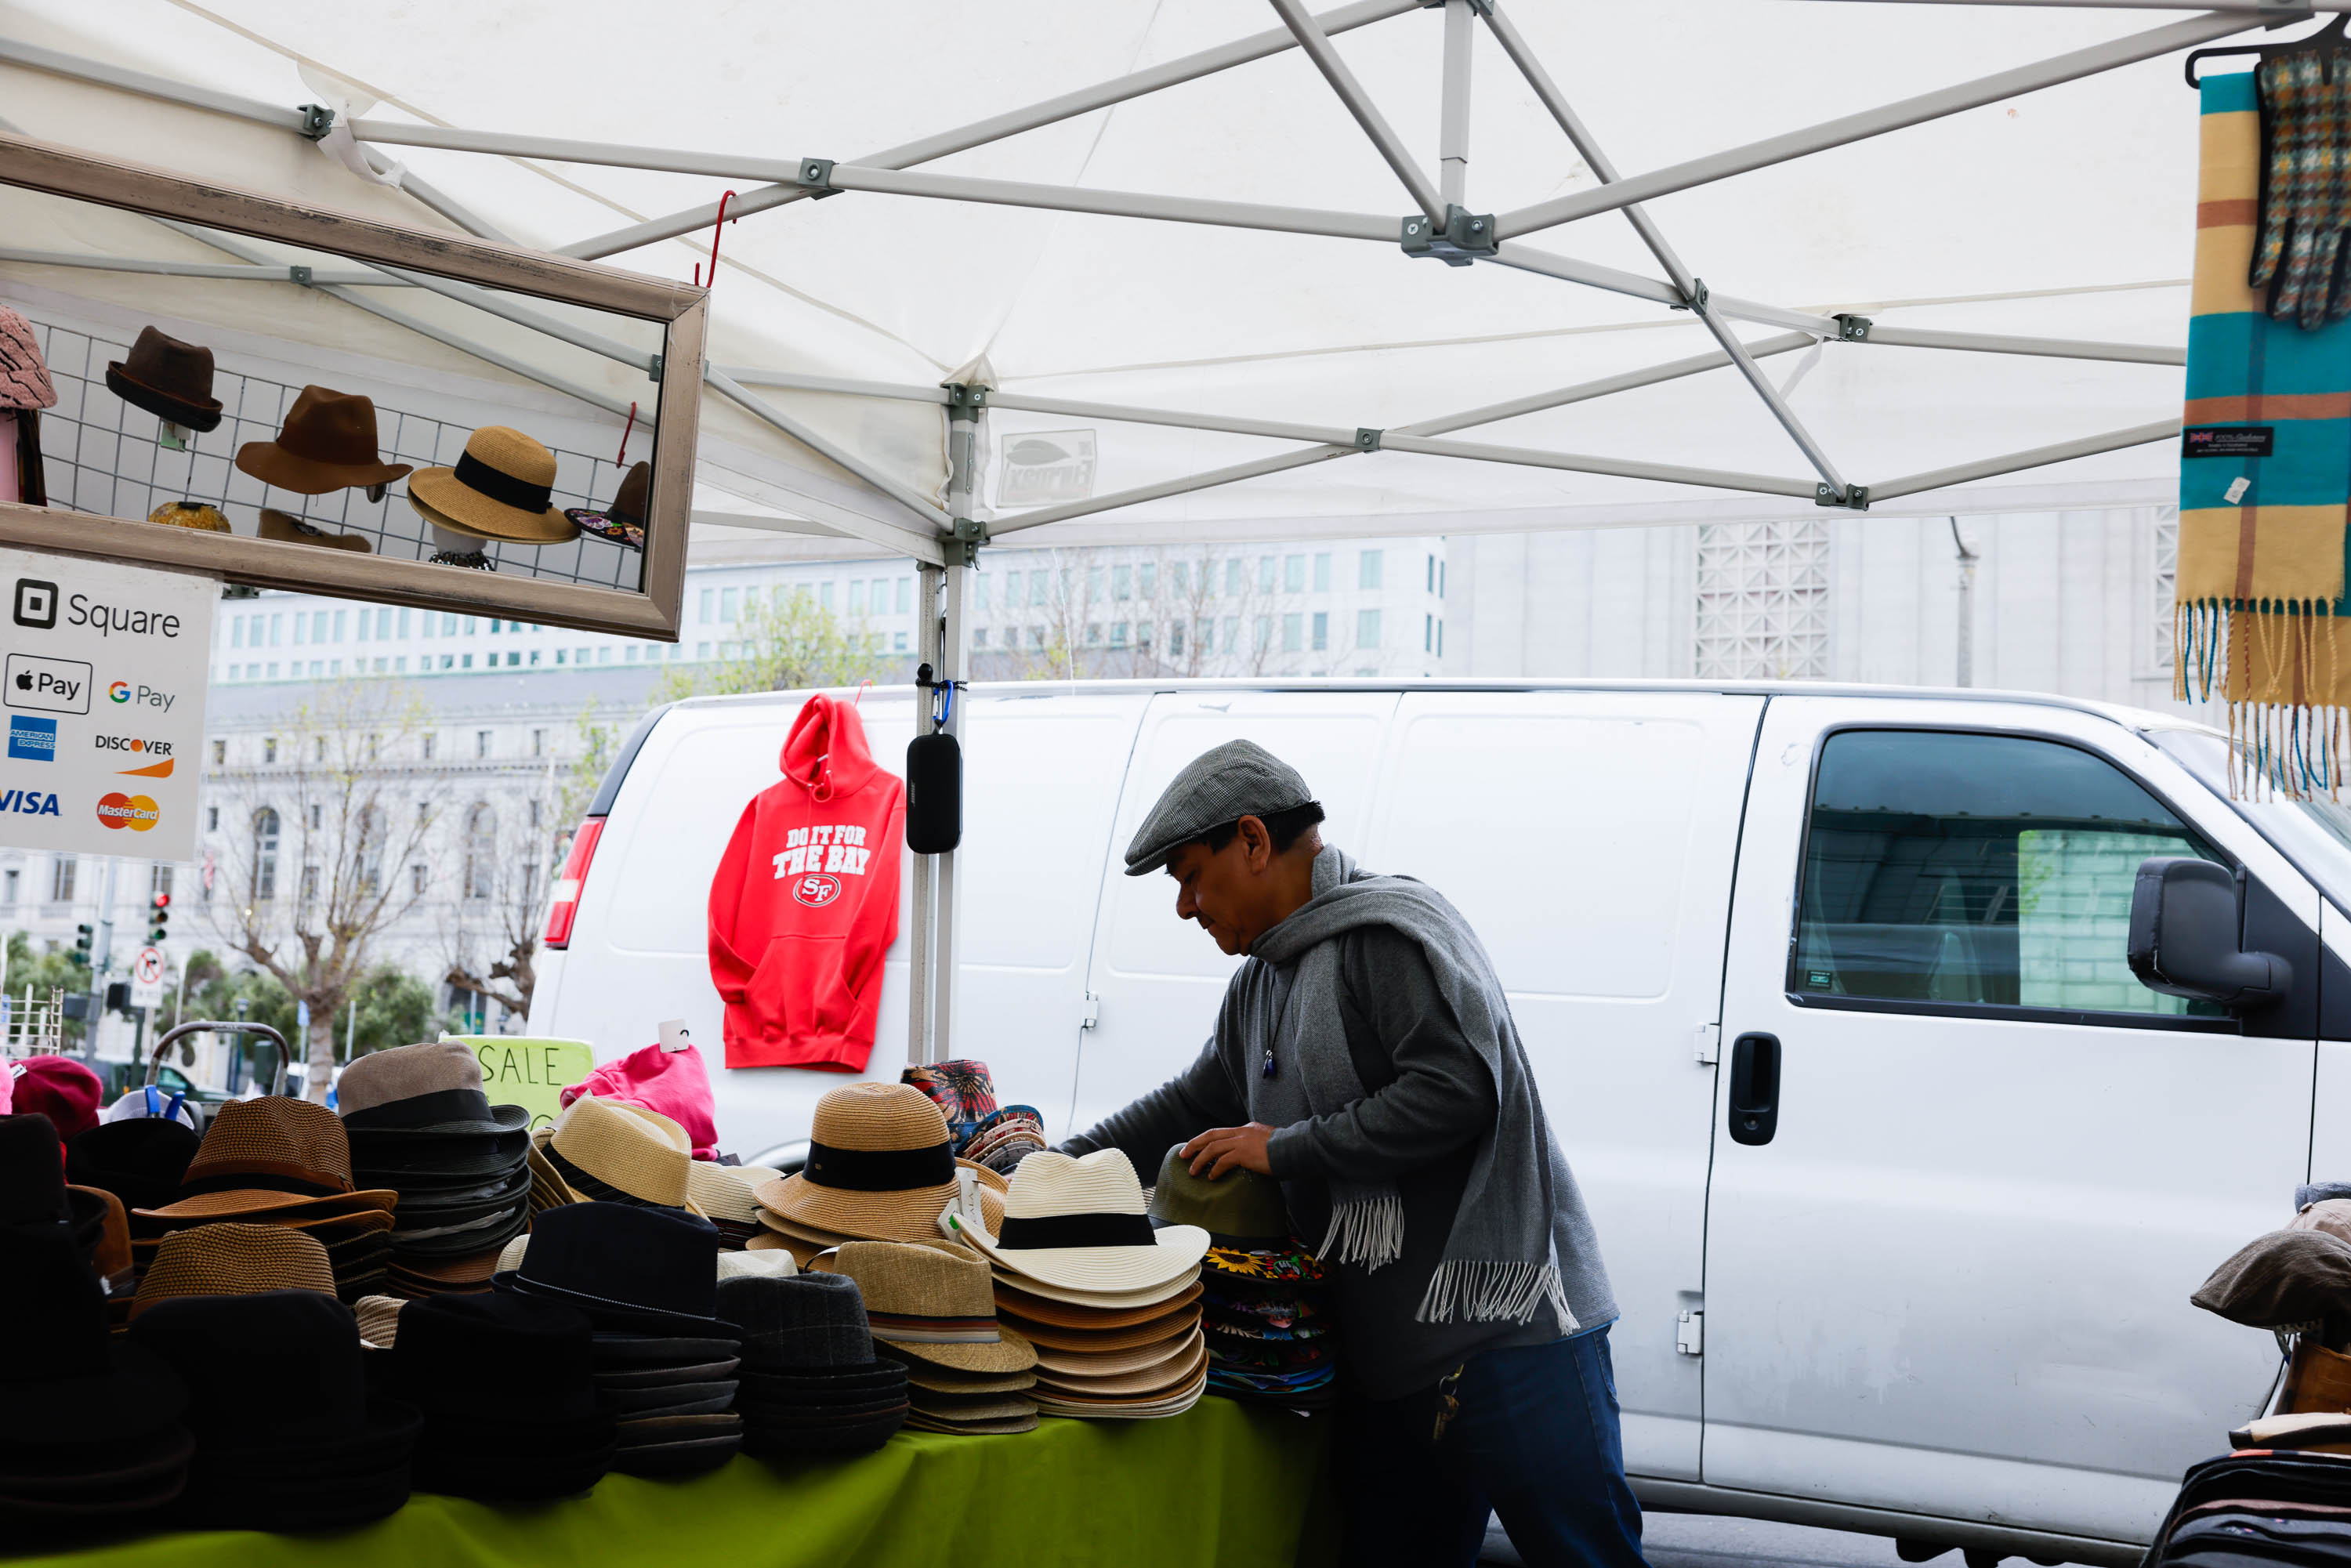 a Latino man under a canopy sets up a merchandise table in front of a white van